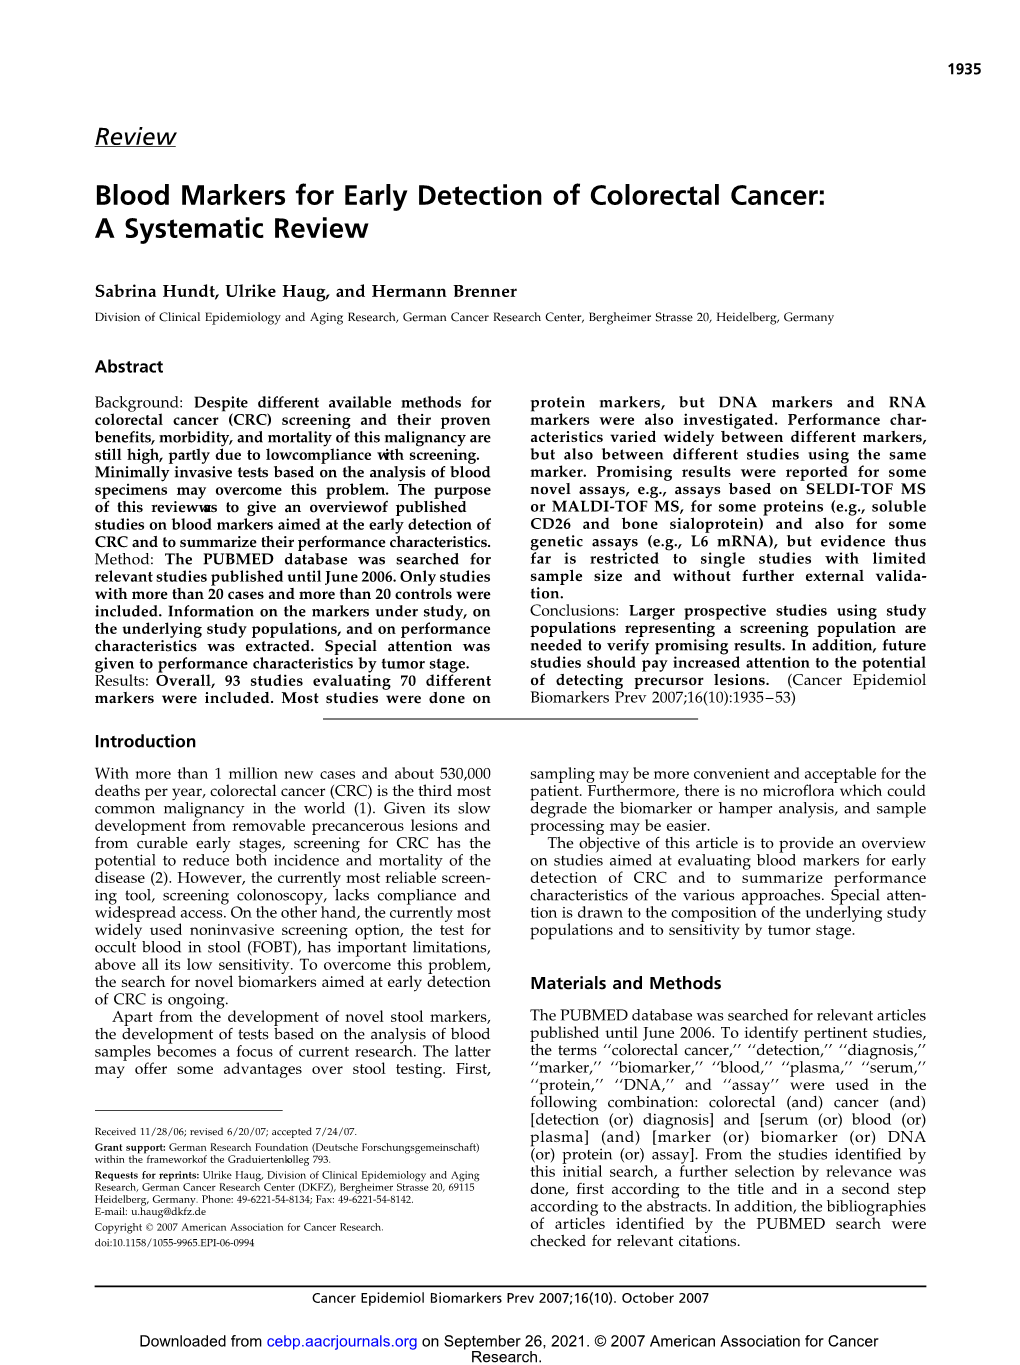 Blood Markers for Early Detection of Colorectal Cancer: a Systematic Review